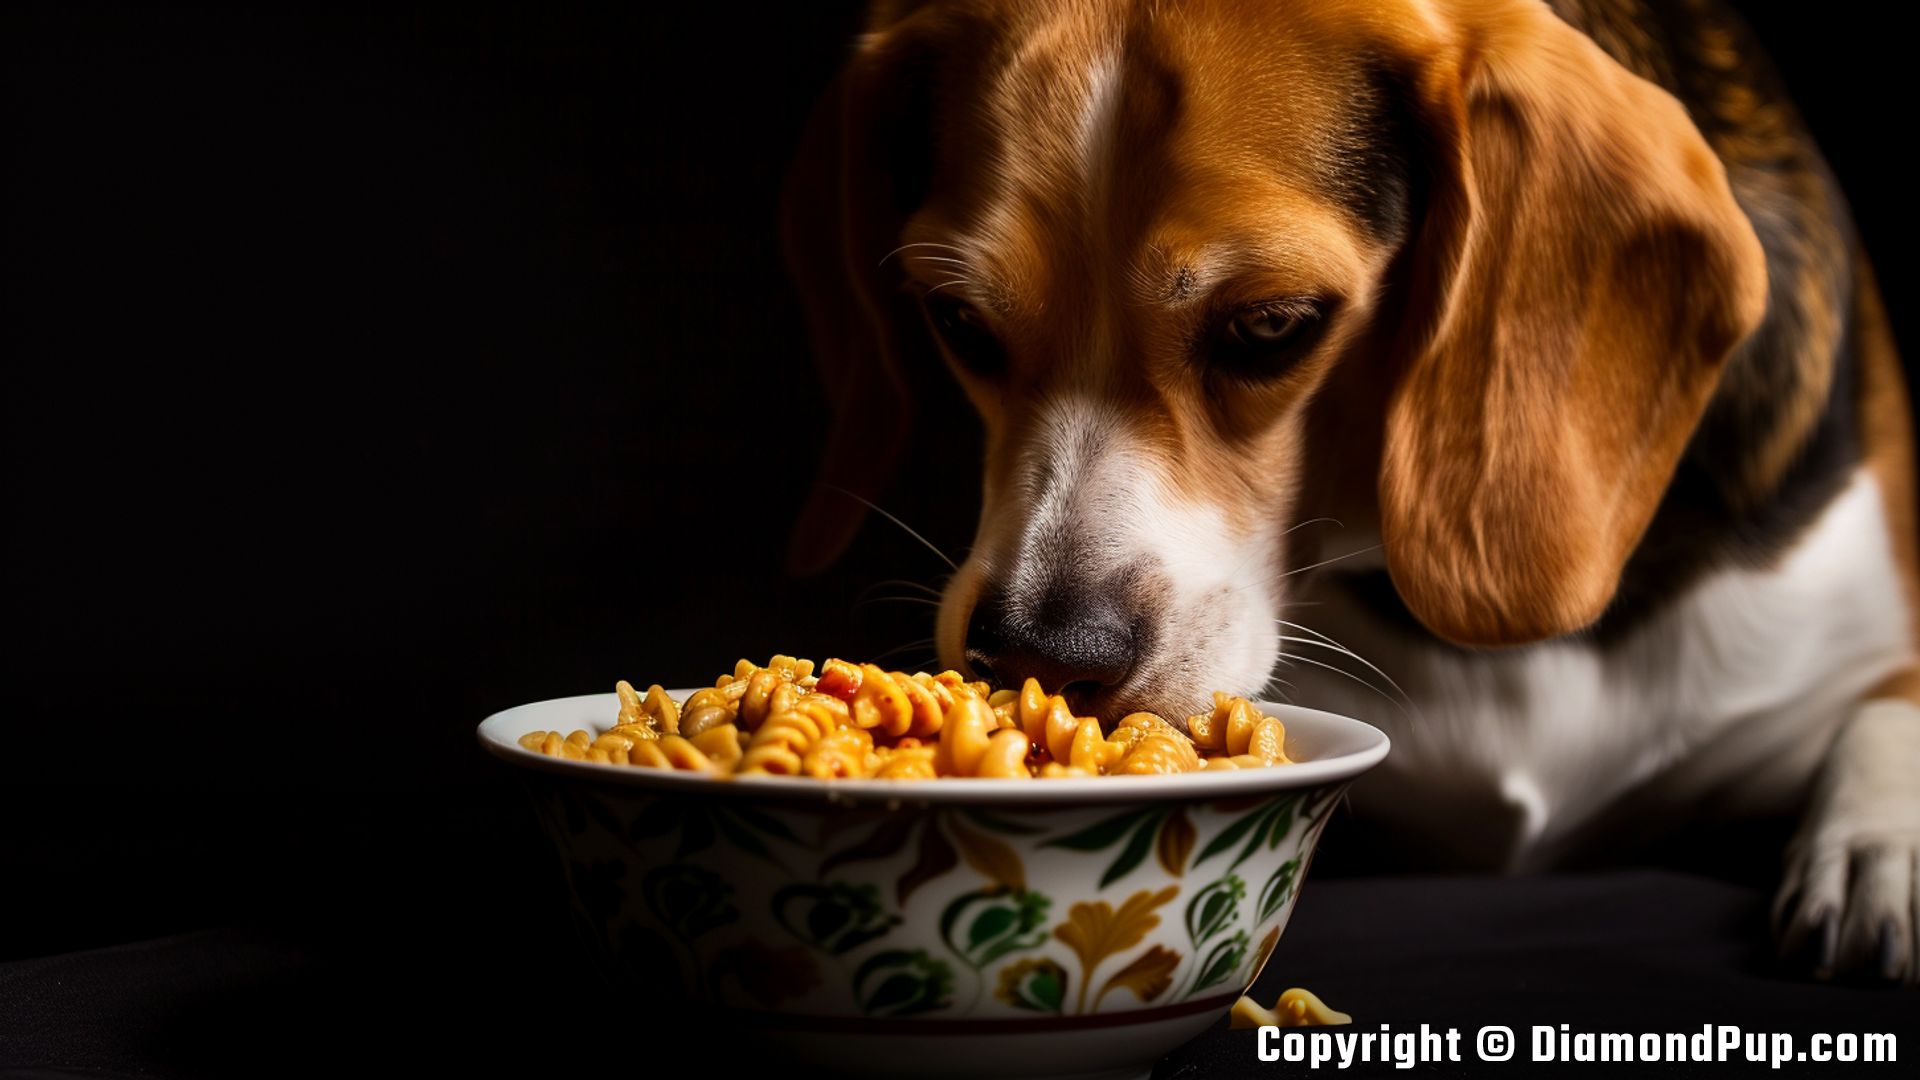 Image of an Adorable Beagle Snacking on Pasta